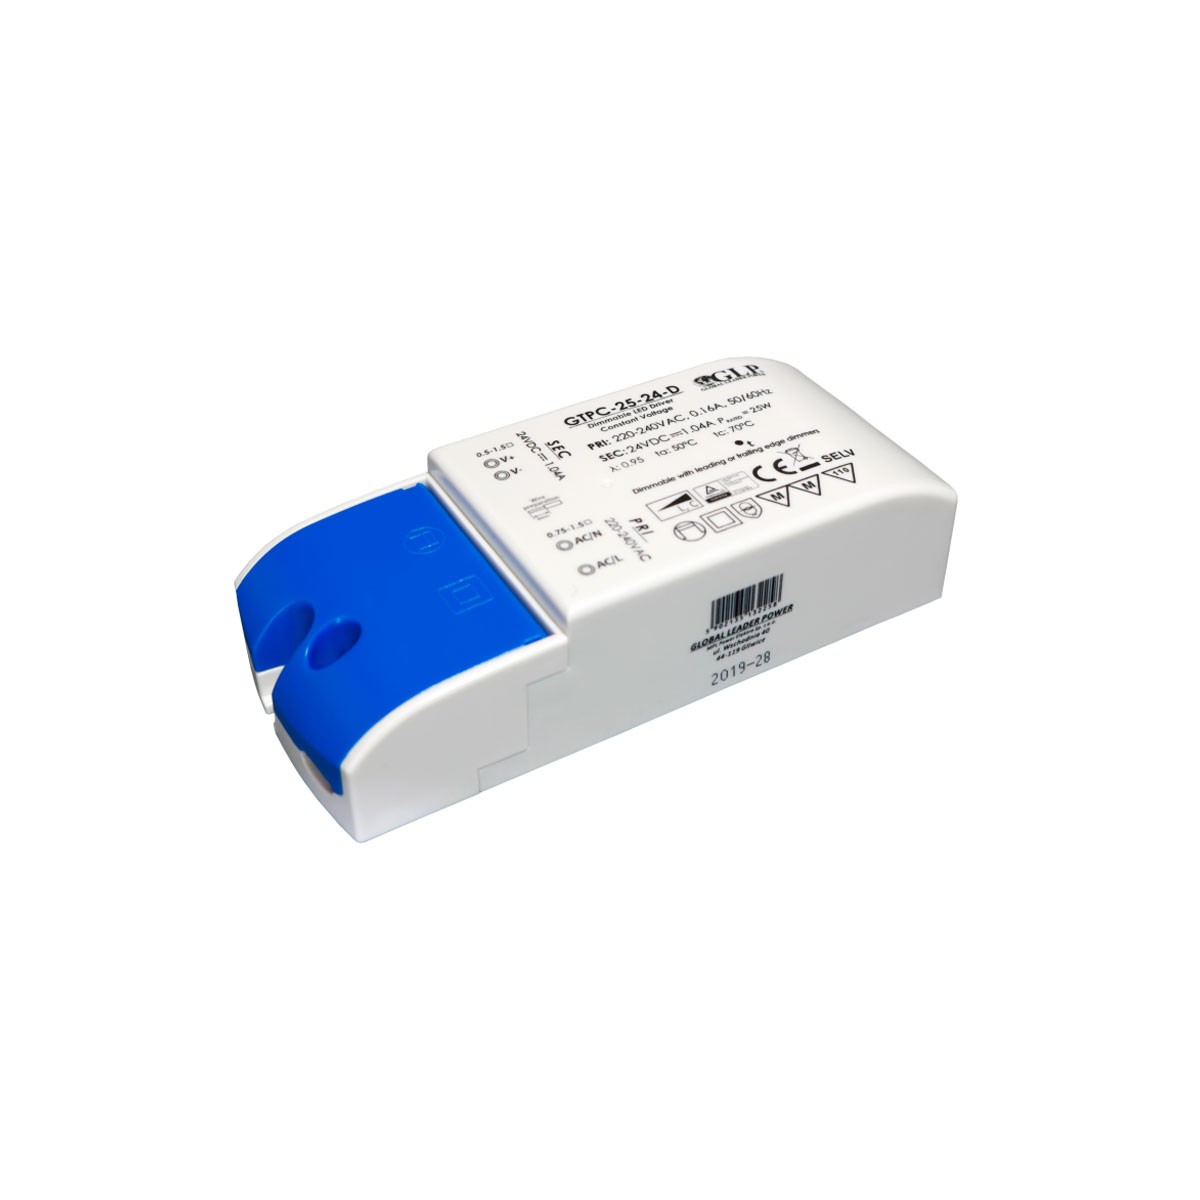 25W 24V dimmable Triac LED constant voltage power supply